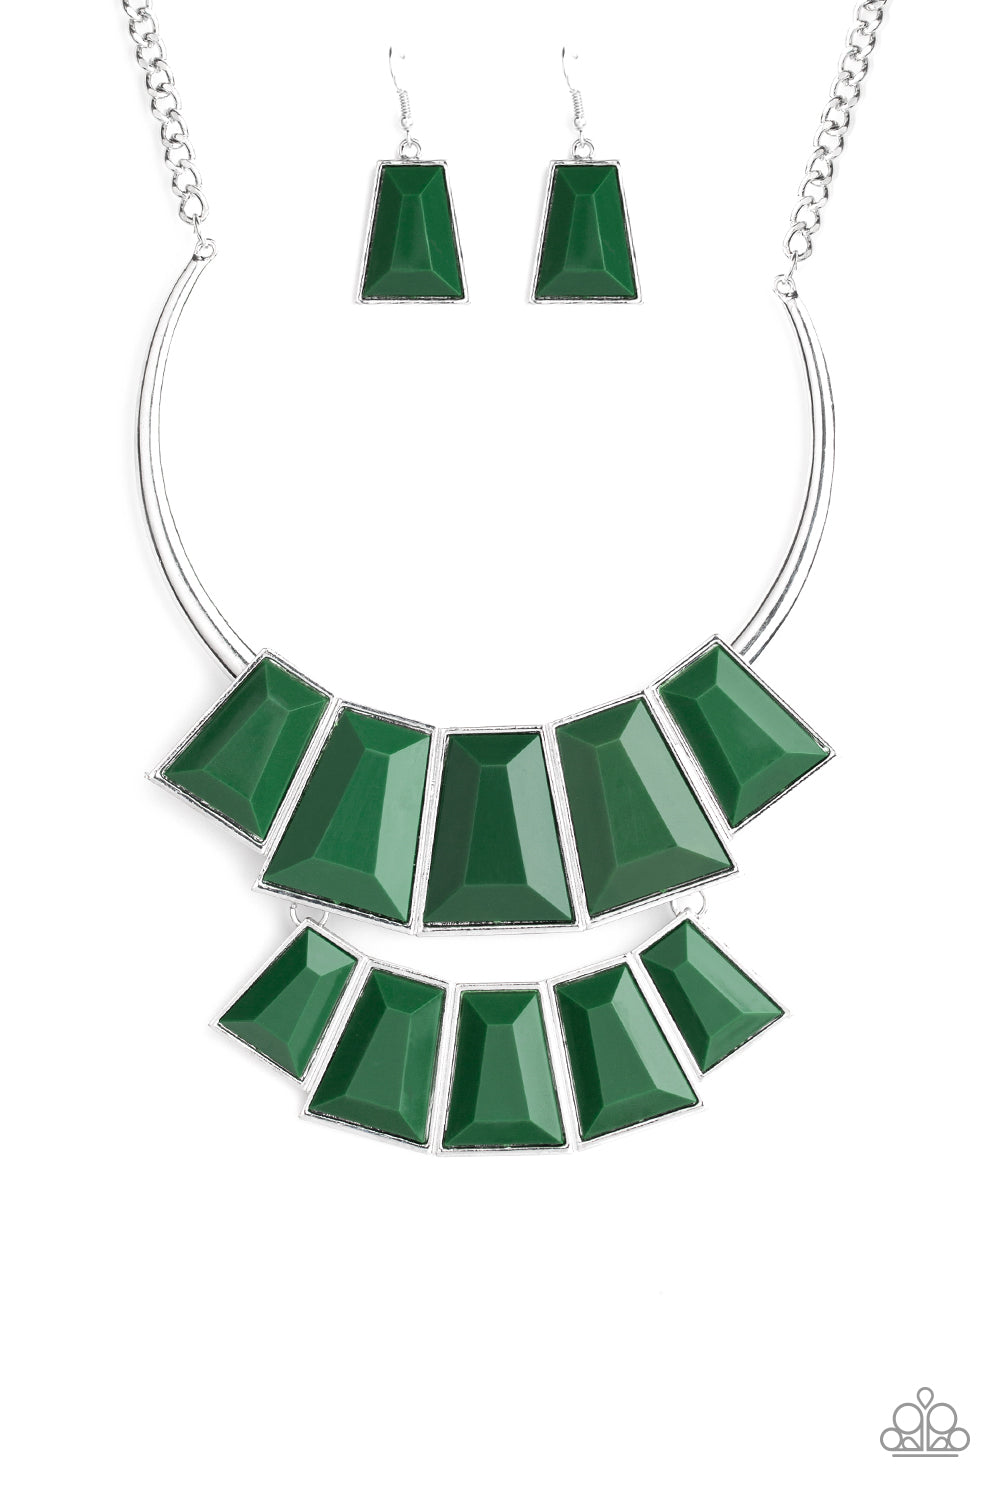 Lions, TIGRESS, and Bears - Green - Necklace - Paparazzi Accessories